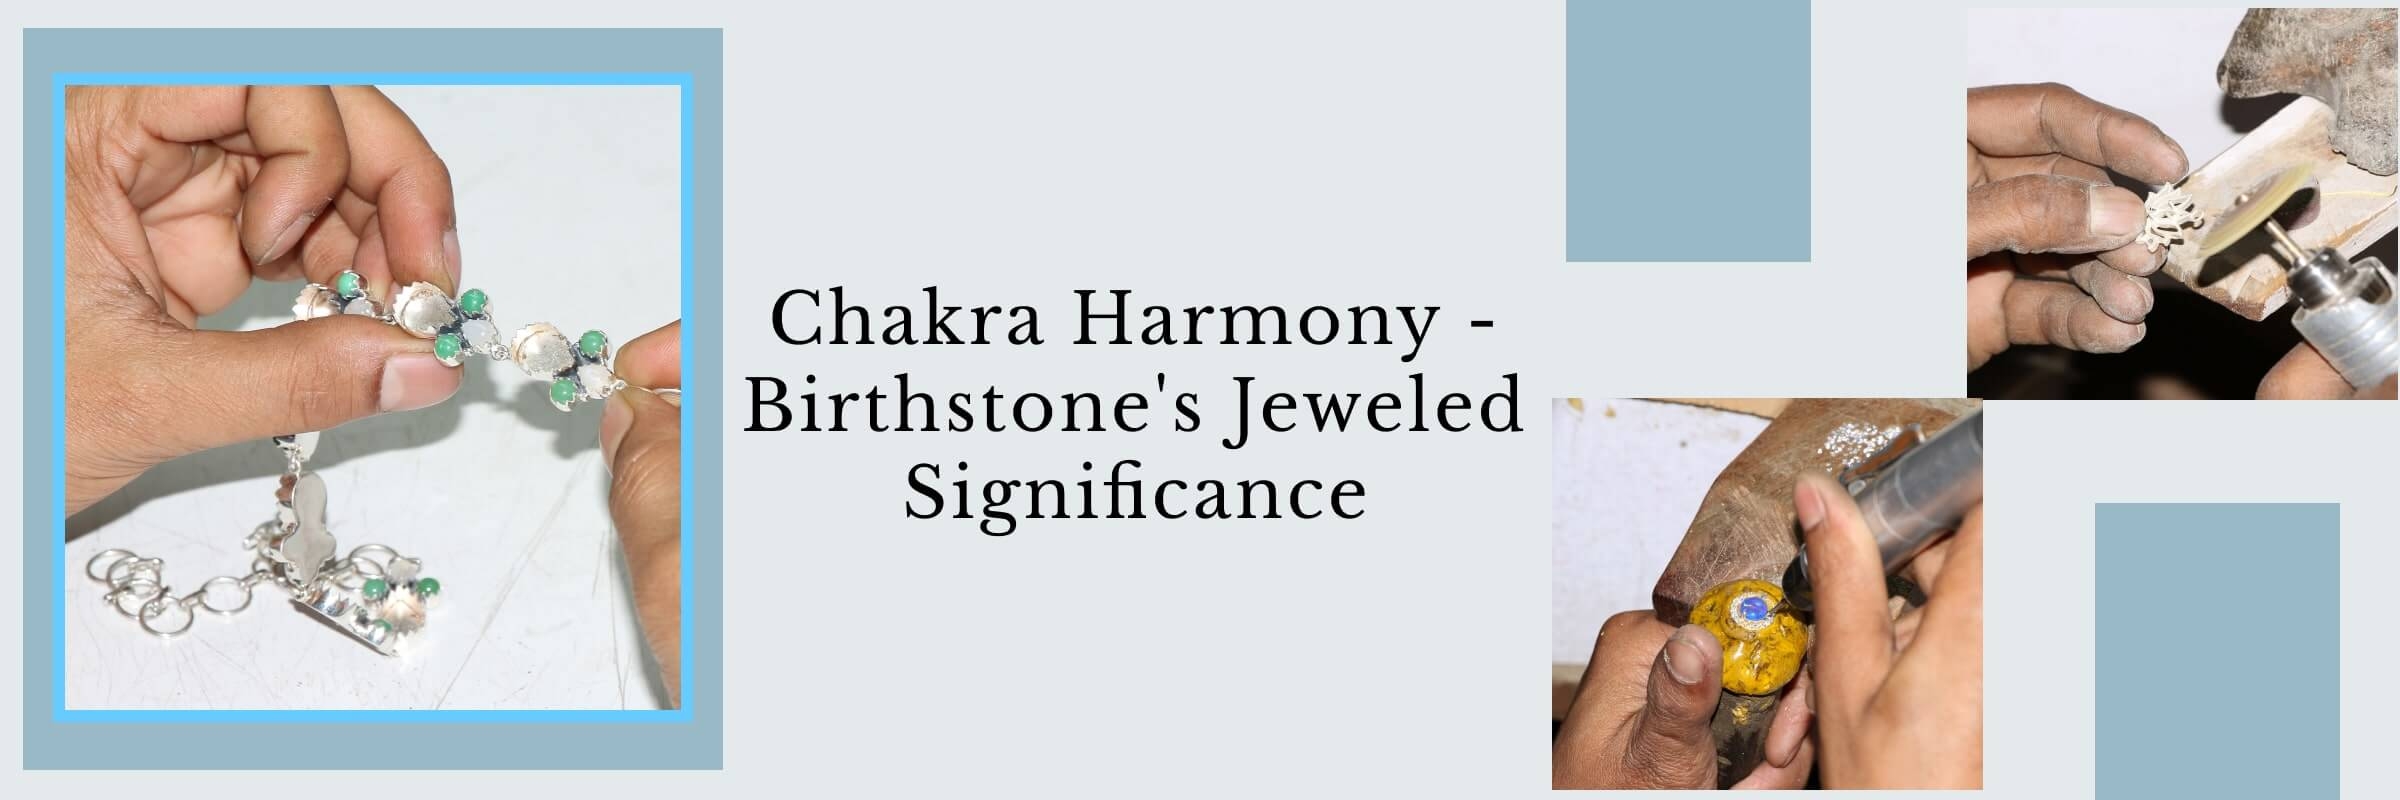 Chakra and Birthstone Jewelry: Designs of Significance